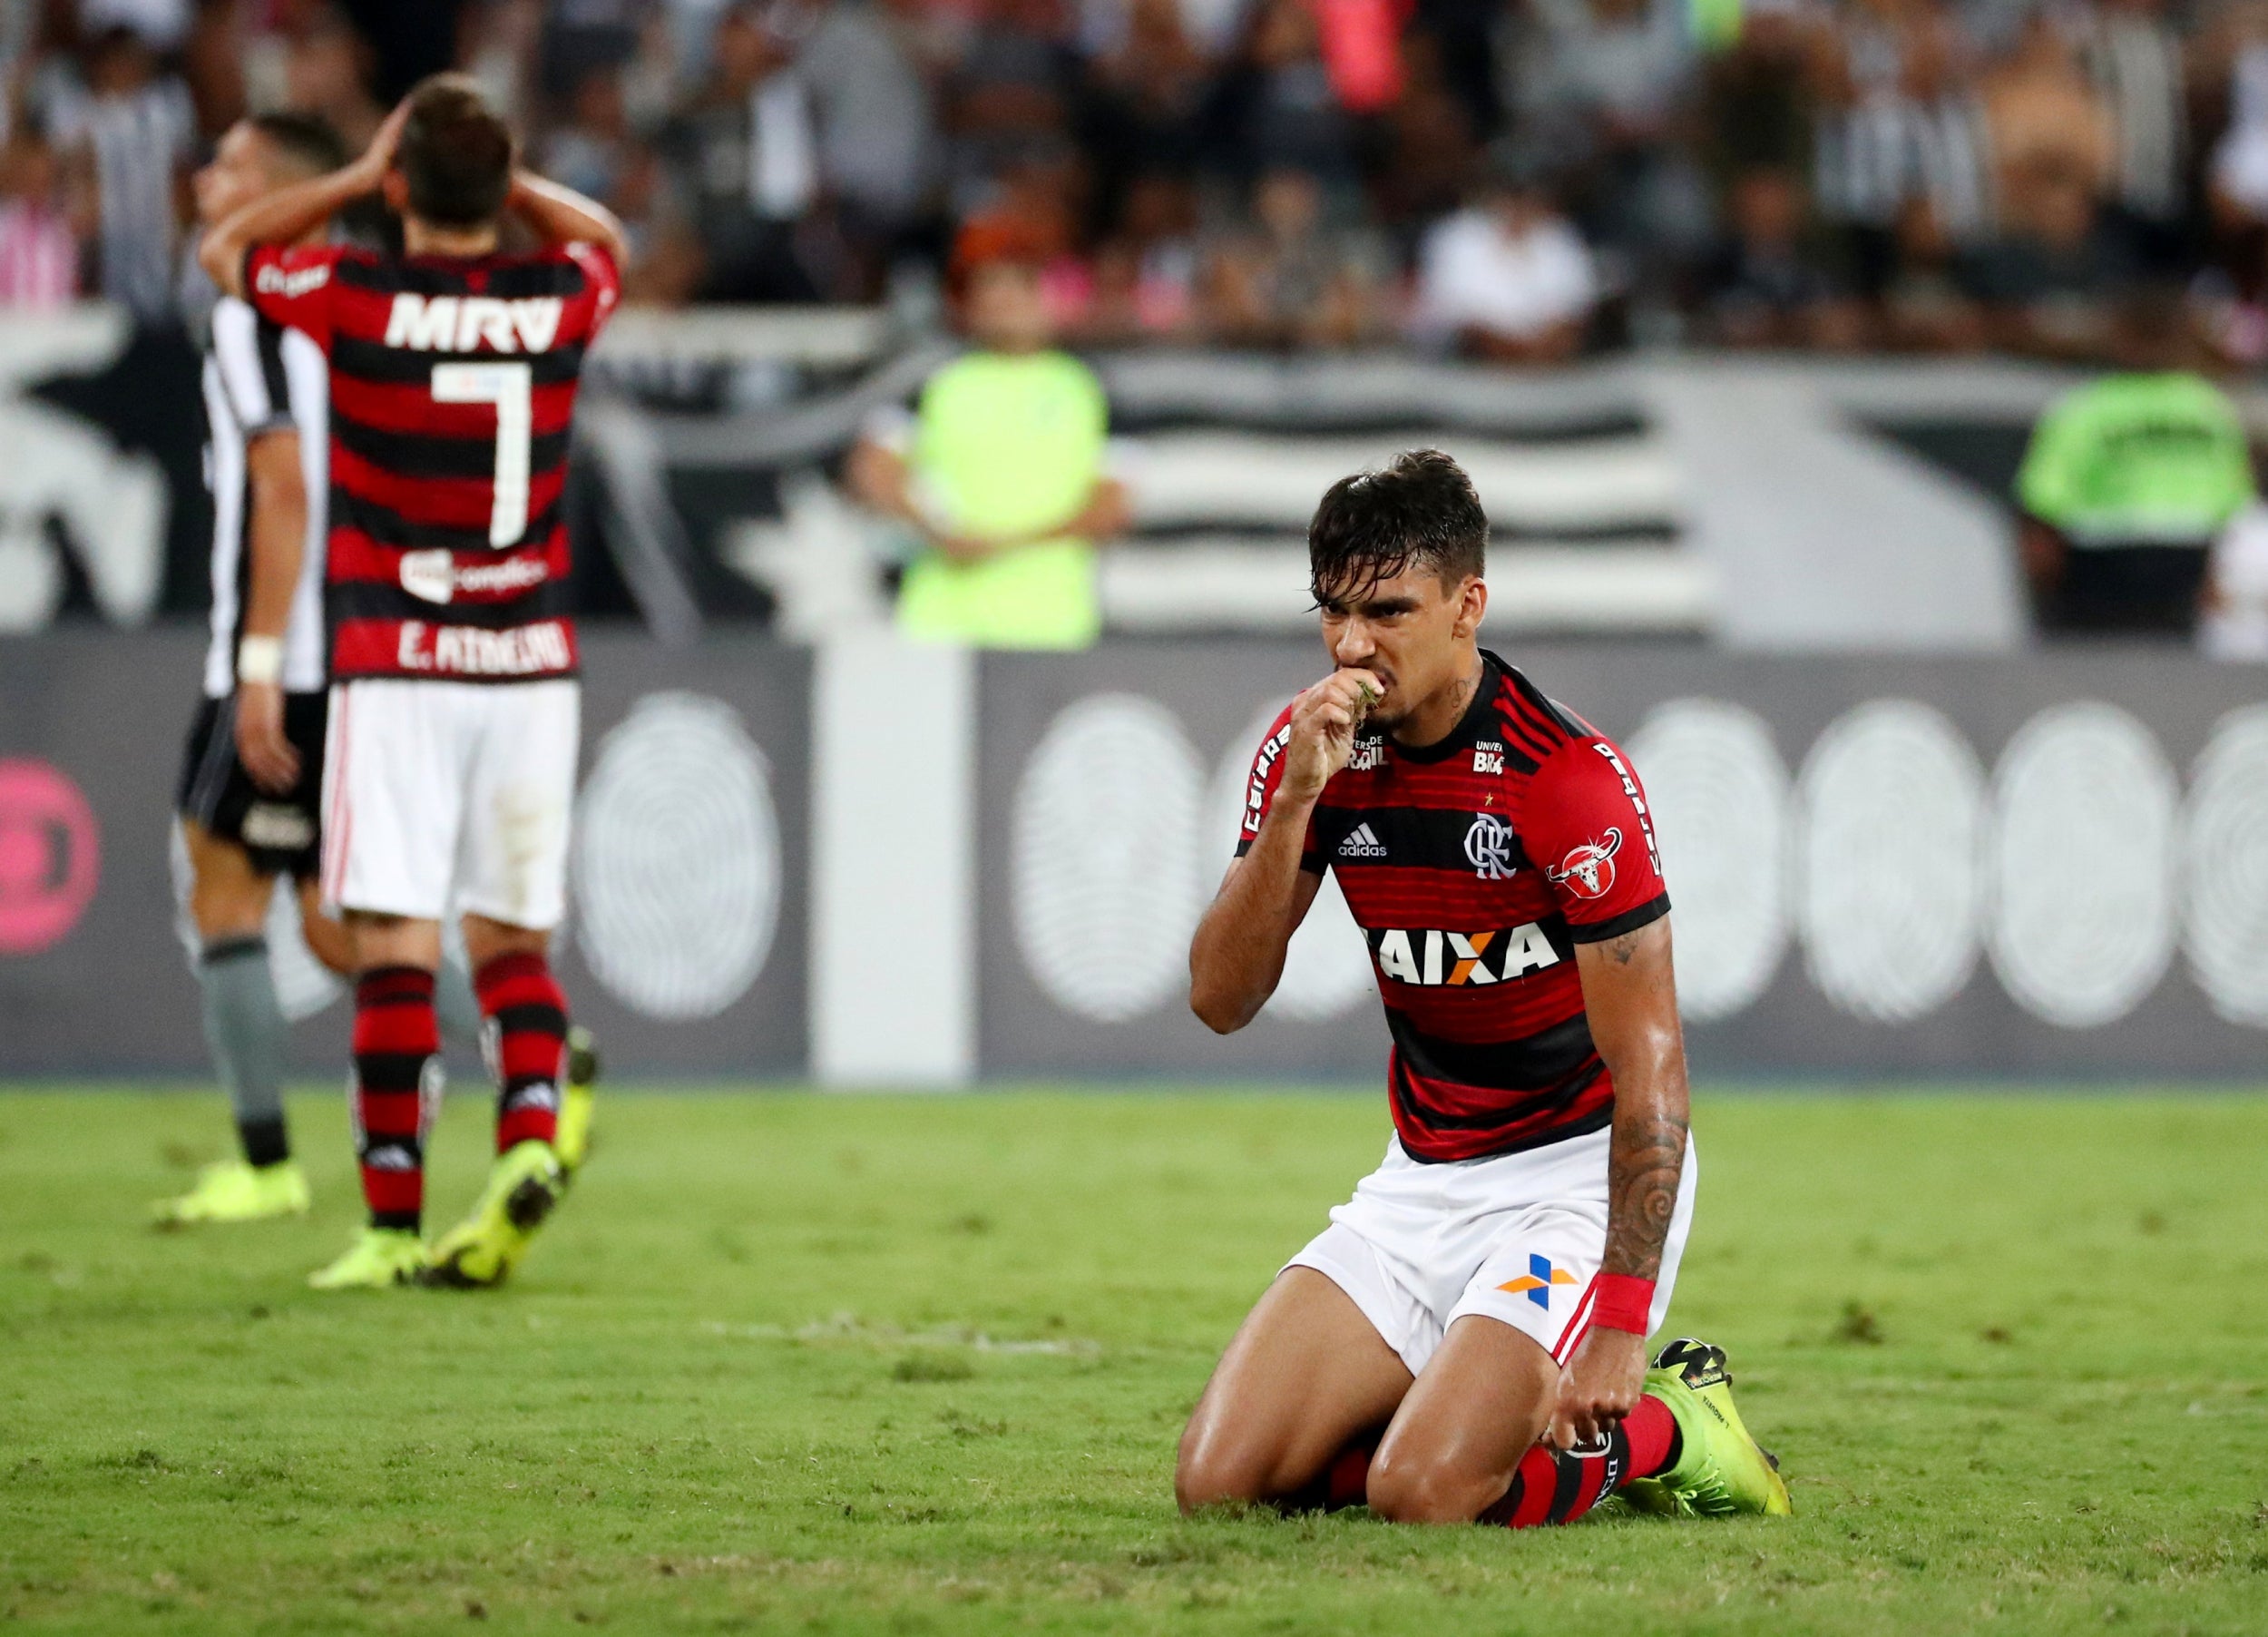 Paqueta has signed from Flamengo